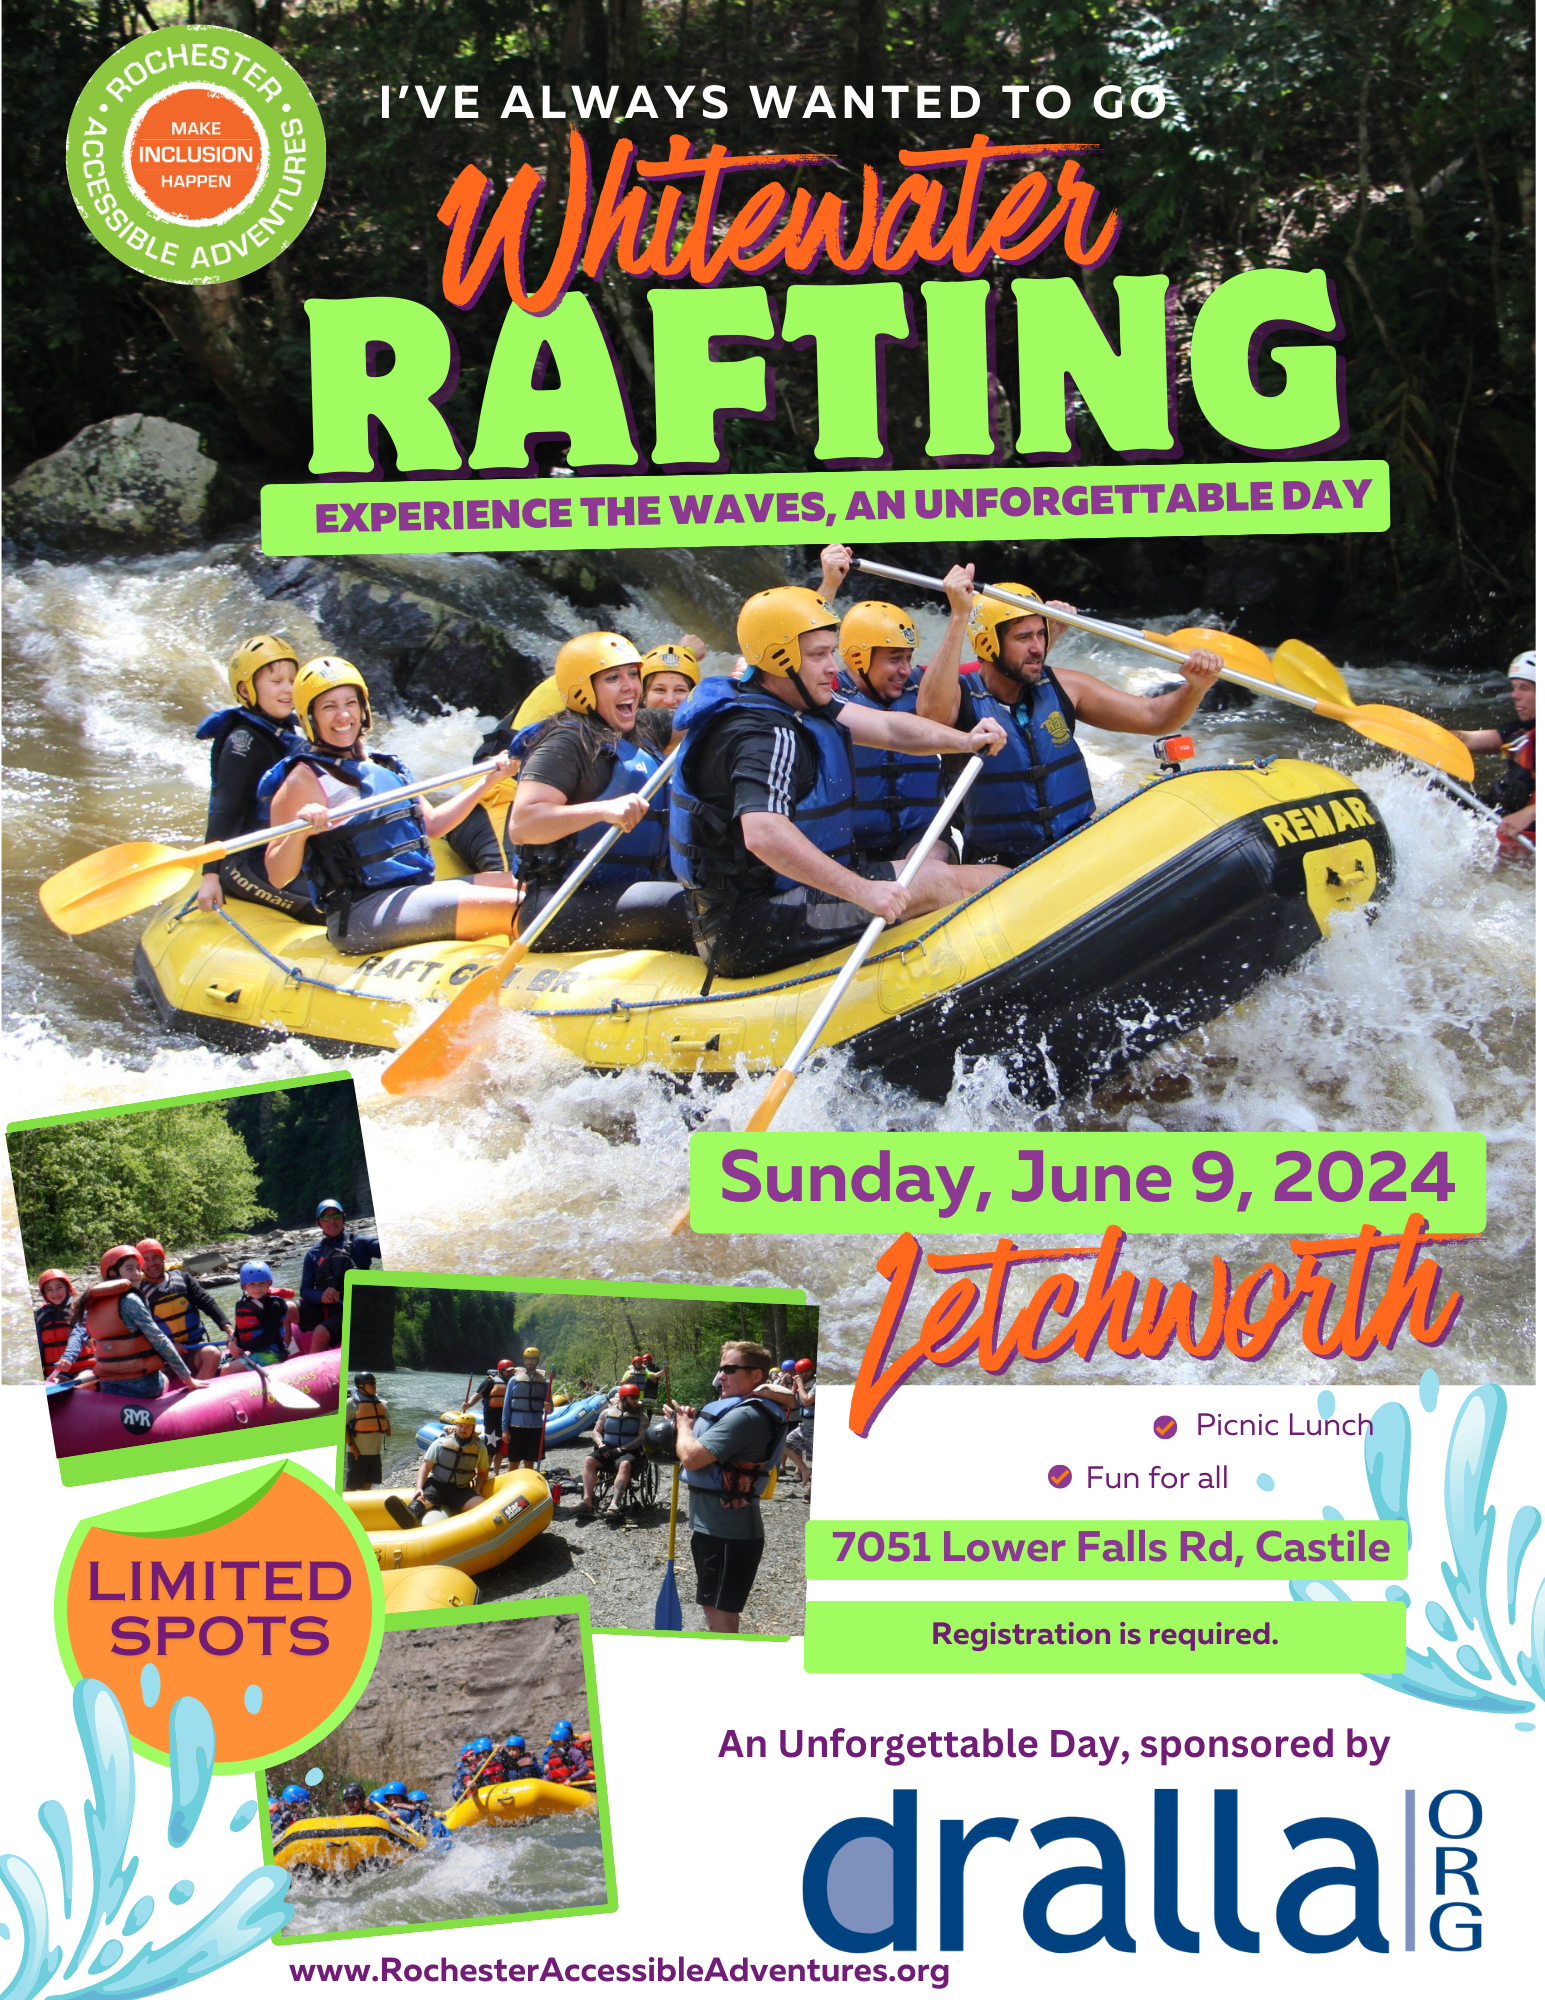 A flyer of folks rafting on a river with images included from Adventure Calls Outfitters's website showing people who use mobility devices in groups rafting. Info provided about the June 9th opportunity.